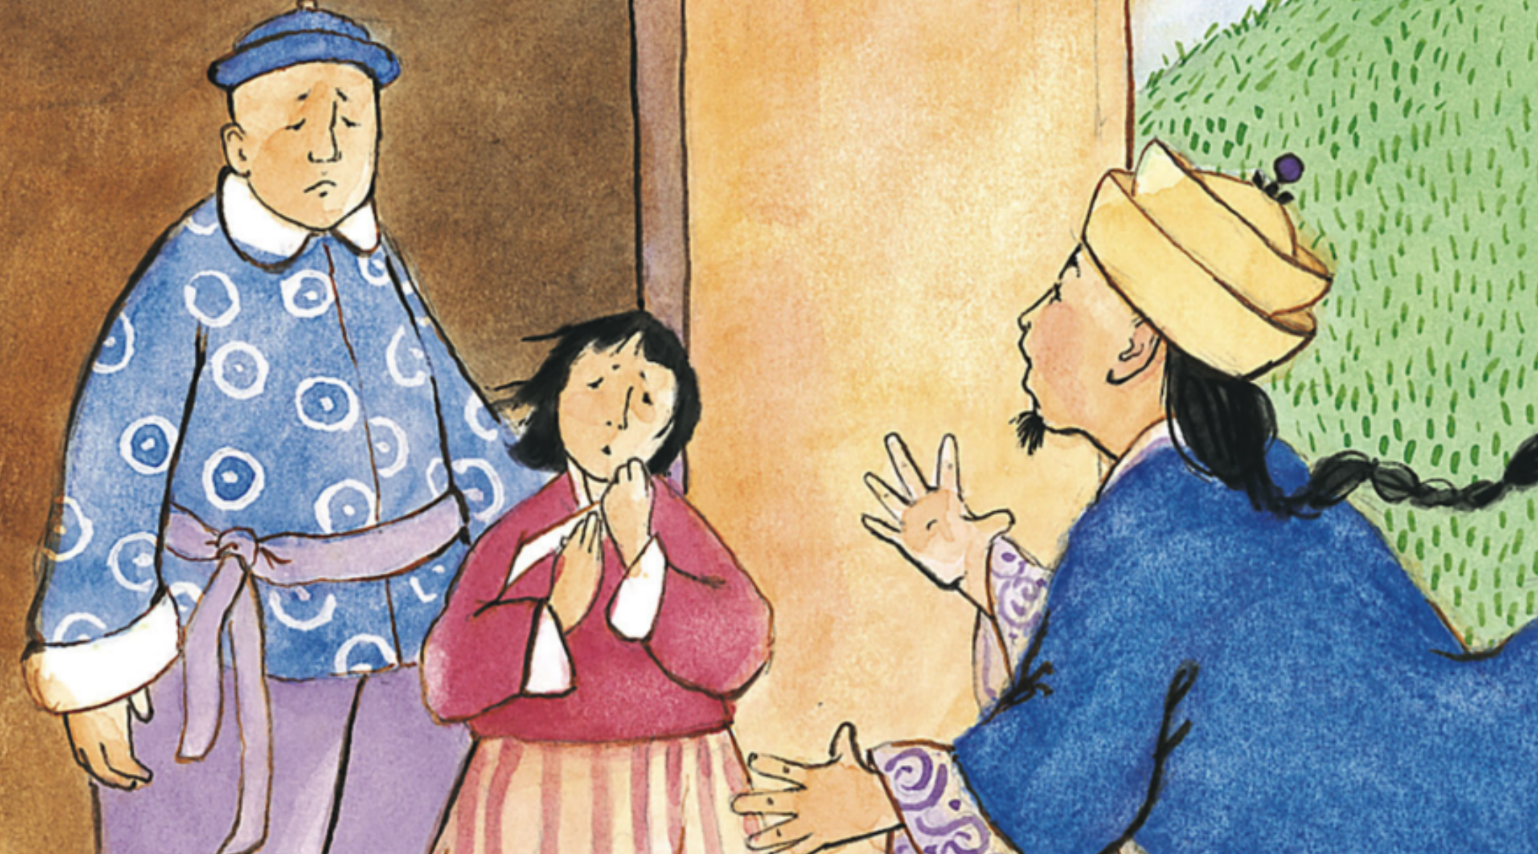 A young girl, an elderly man, and another man from a folktale